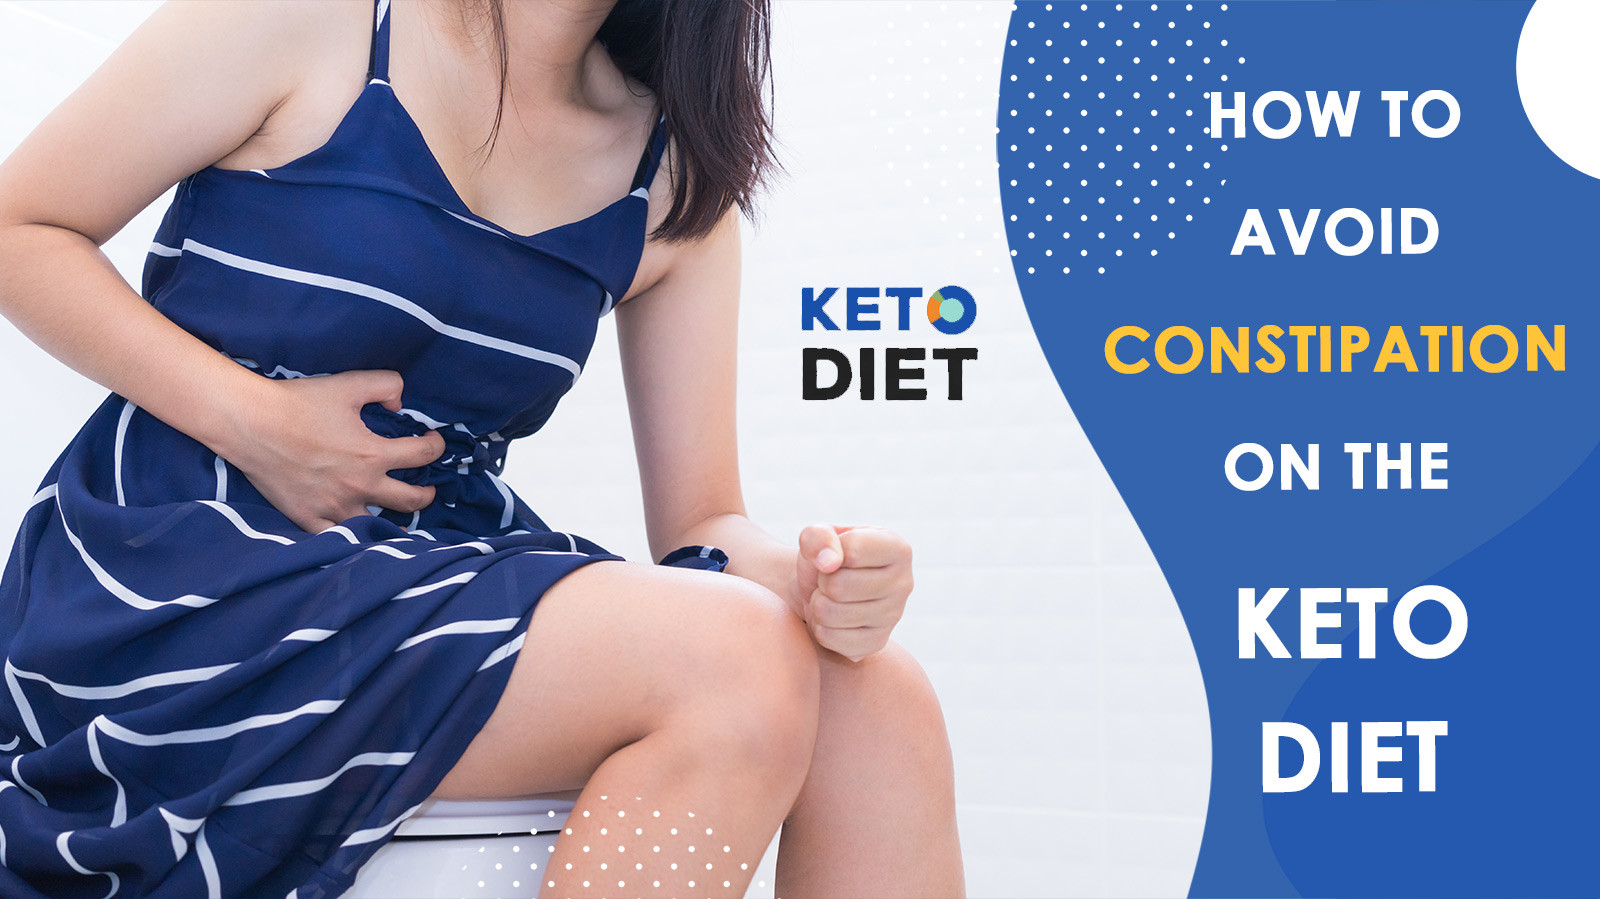 Constipation On Keto Diet
 How to Avoid constipation on the Keto Diet Houston